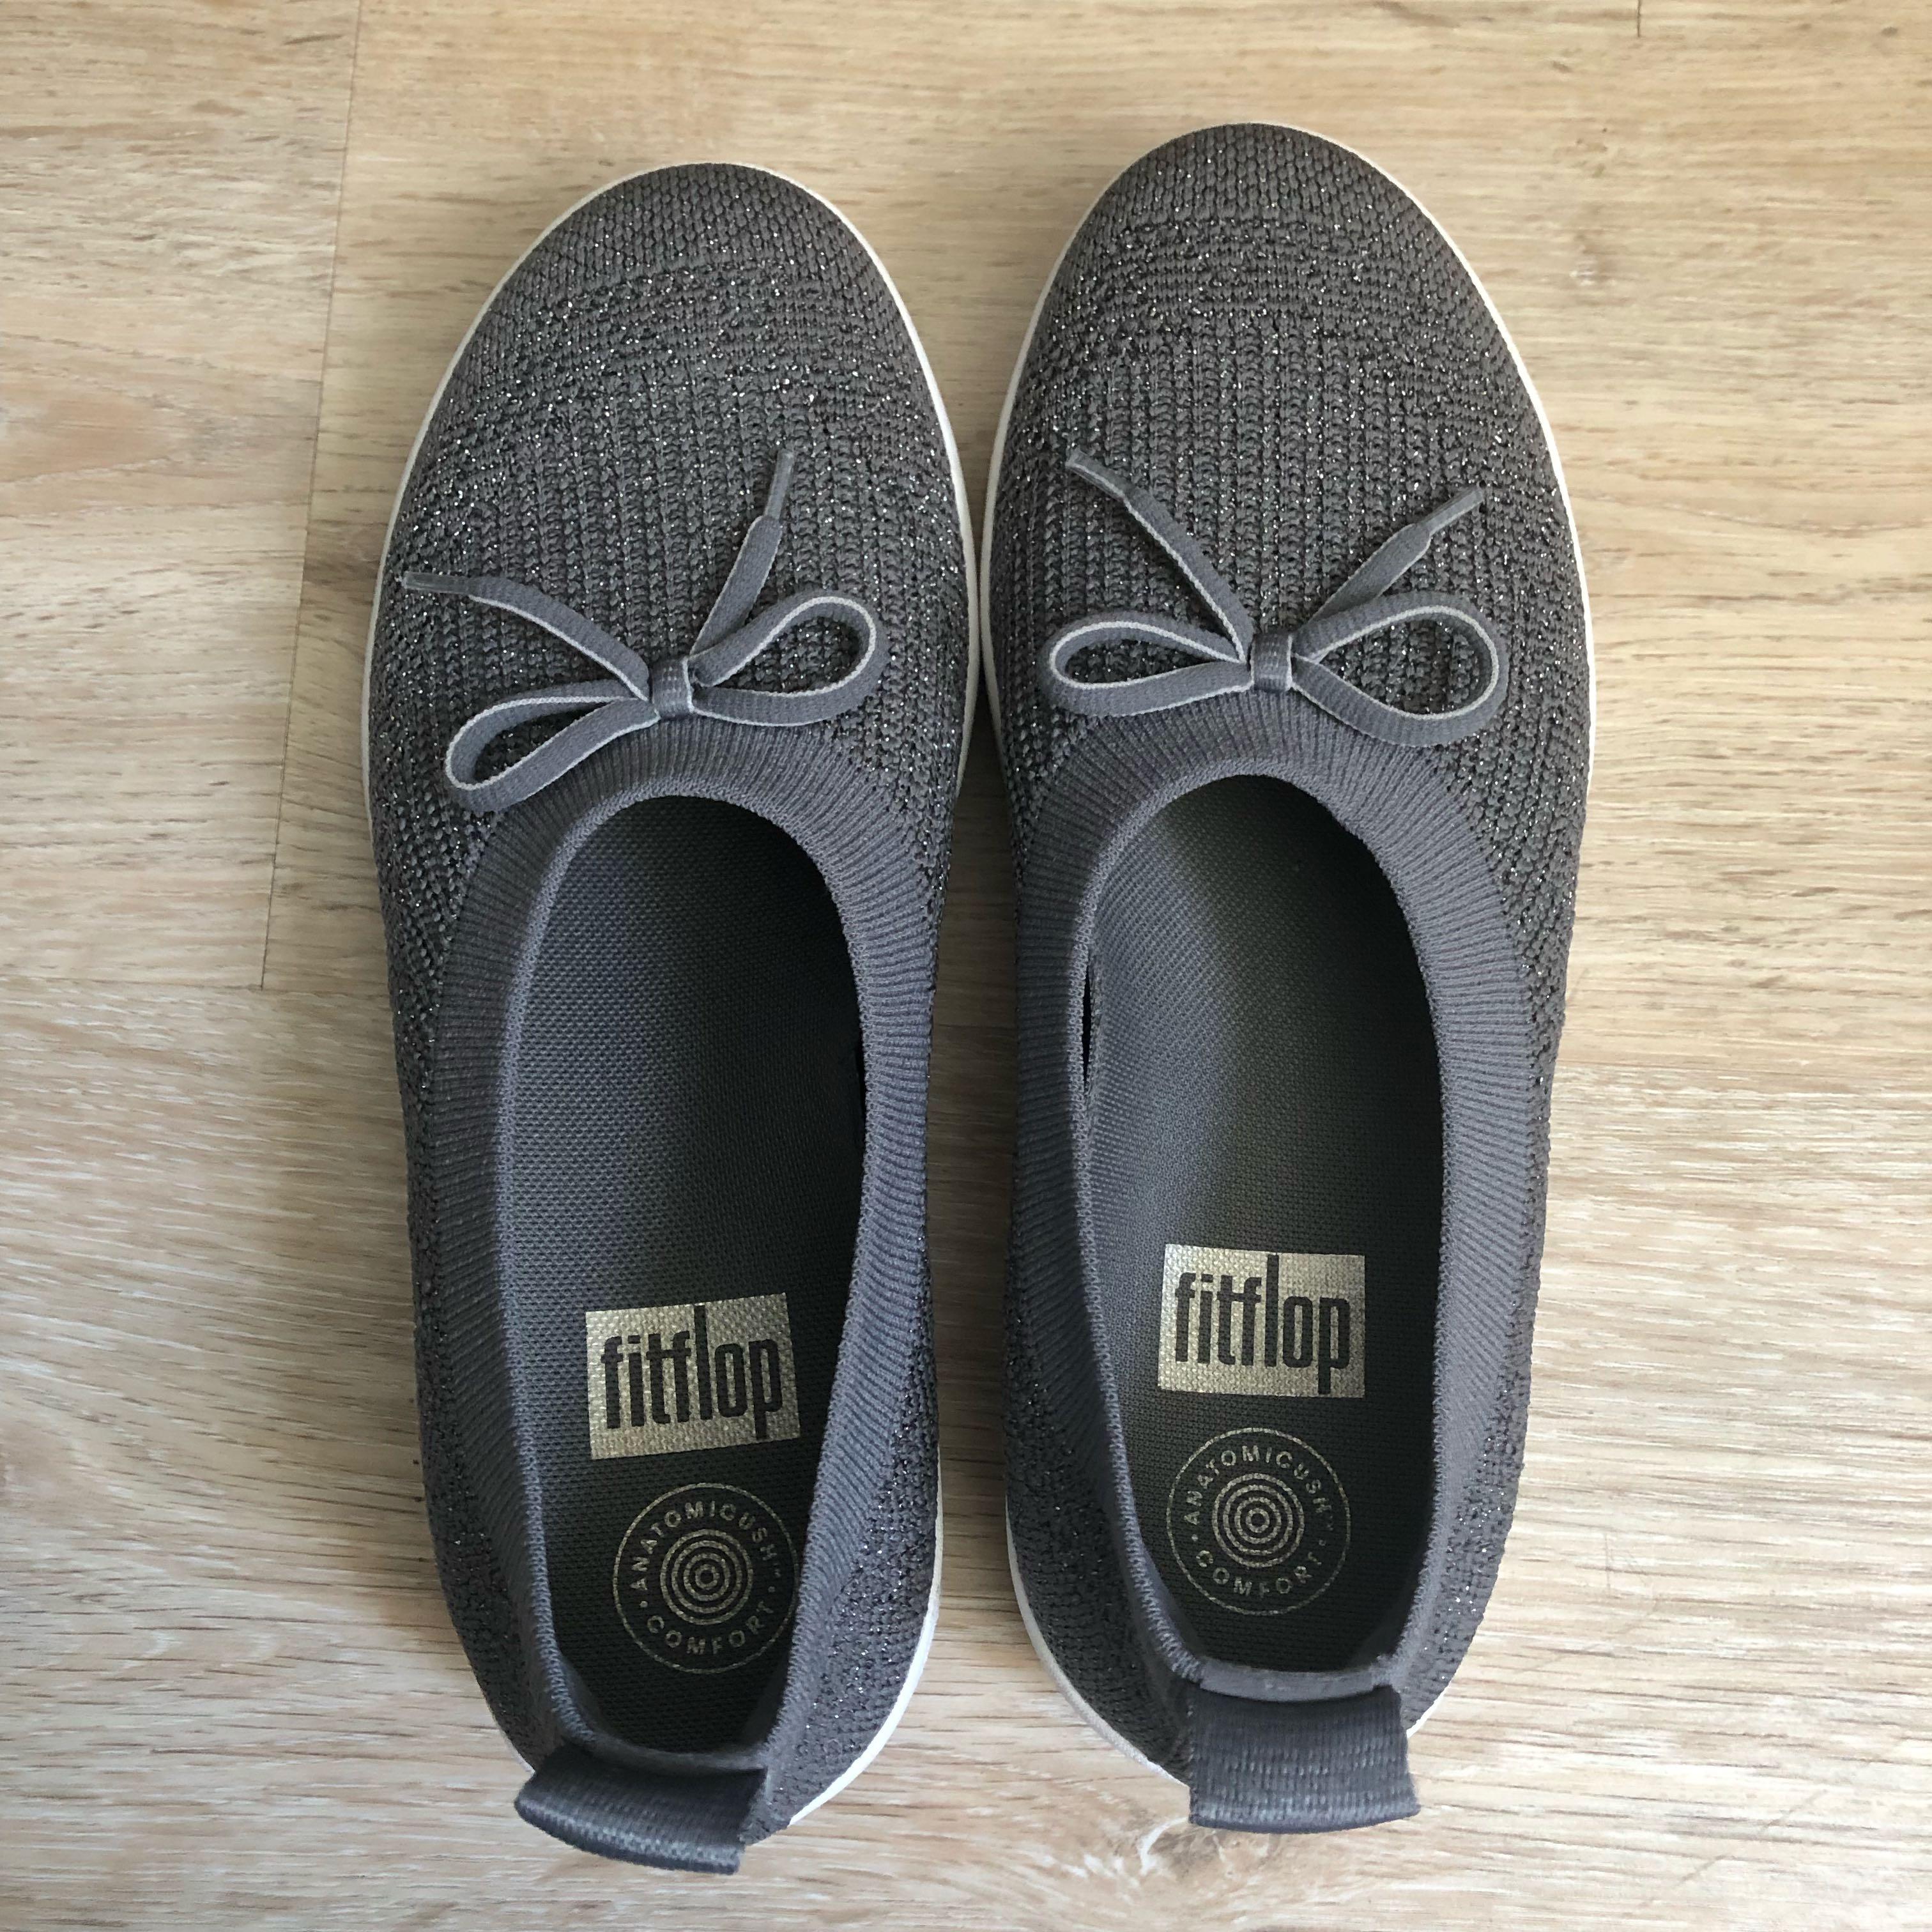 fitflop uberknit ballerina with bow